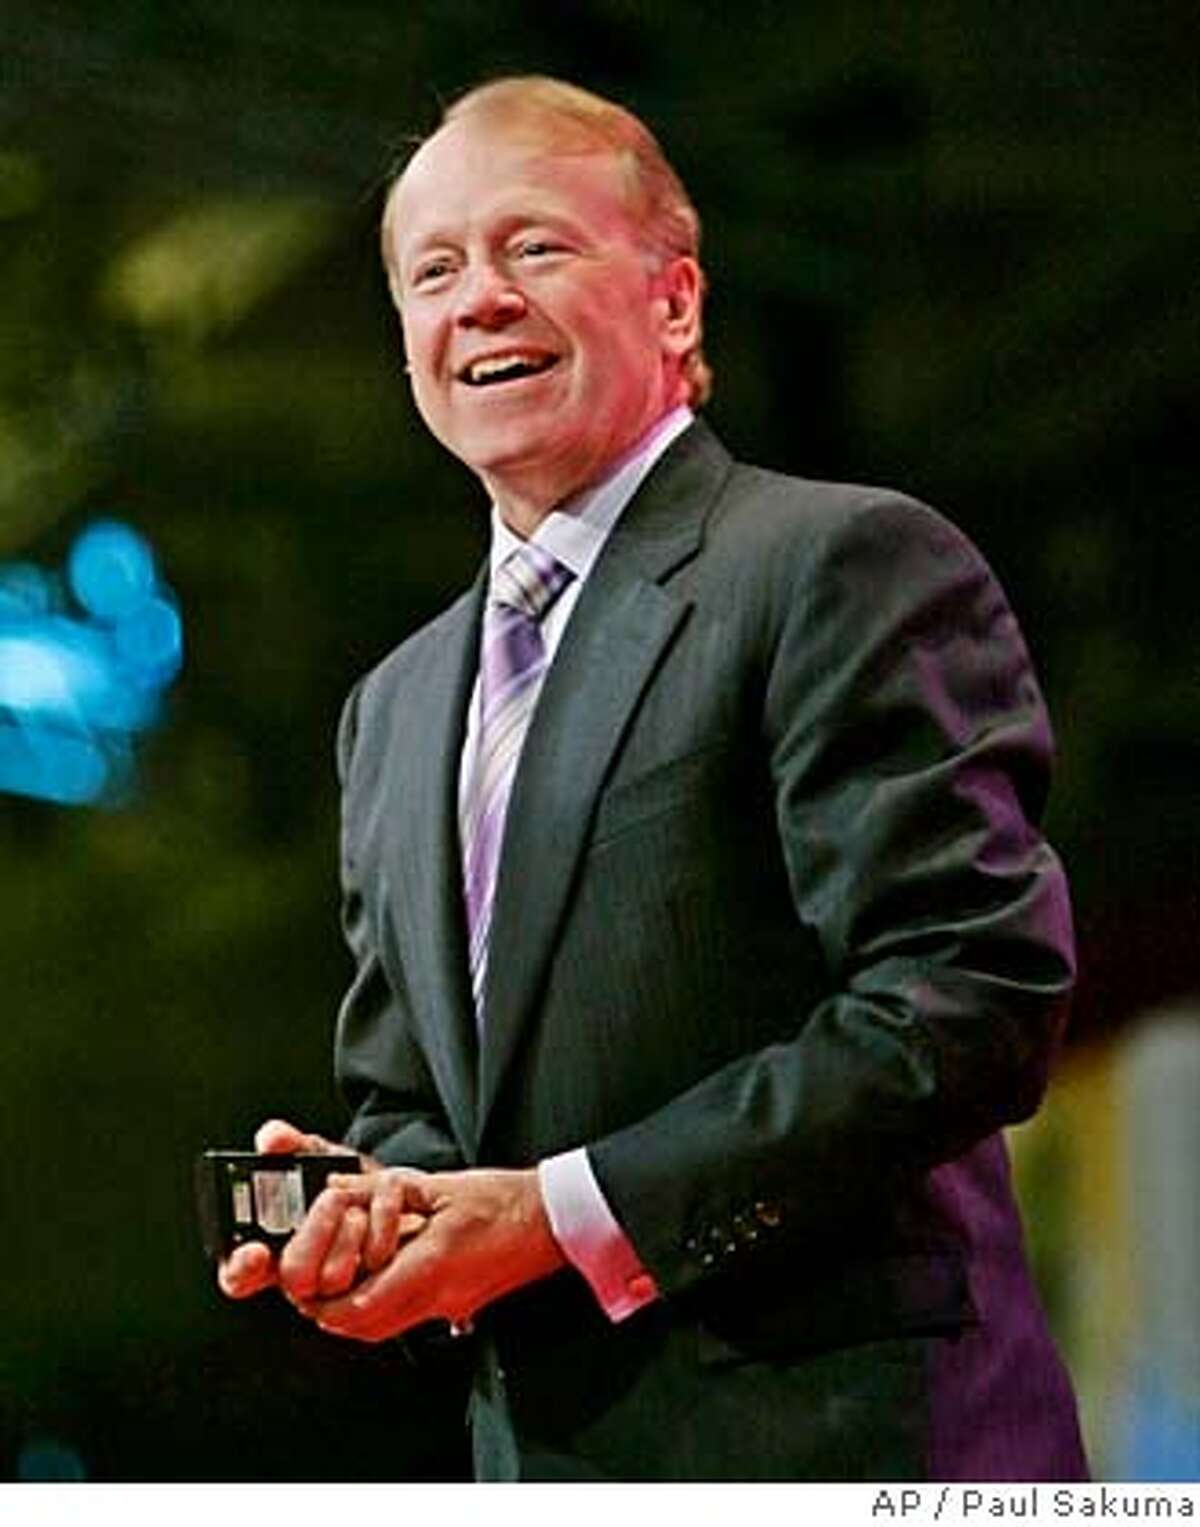 ** FILE ** Cisco Systems CEO John Chambers smiles during a keynote address at the Oracle Open World conference in San Francisco, in this Oct. 24, 2006, file photo. Chambers received compensation the company valued at $12.8 million in fiscal 2007, though his total pay package was actually much higher as he cashed out $50.9 million in stock options while the networking gear maker continues to profit mightily from a boom in demand for Internet bandwidth. (AP Photo/Paul Sakuma, file) OCT. 24, 2006 FILE PHOTO